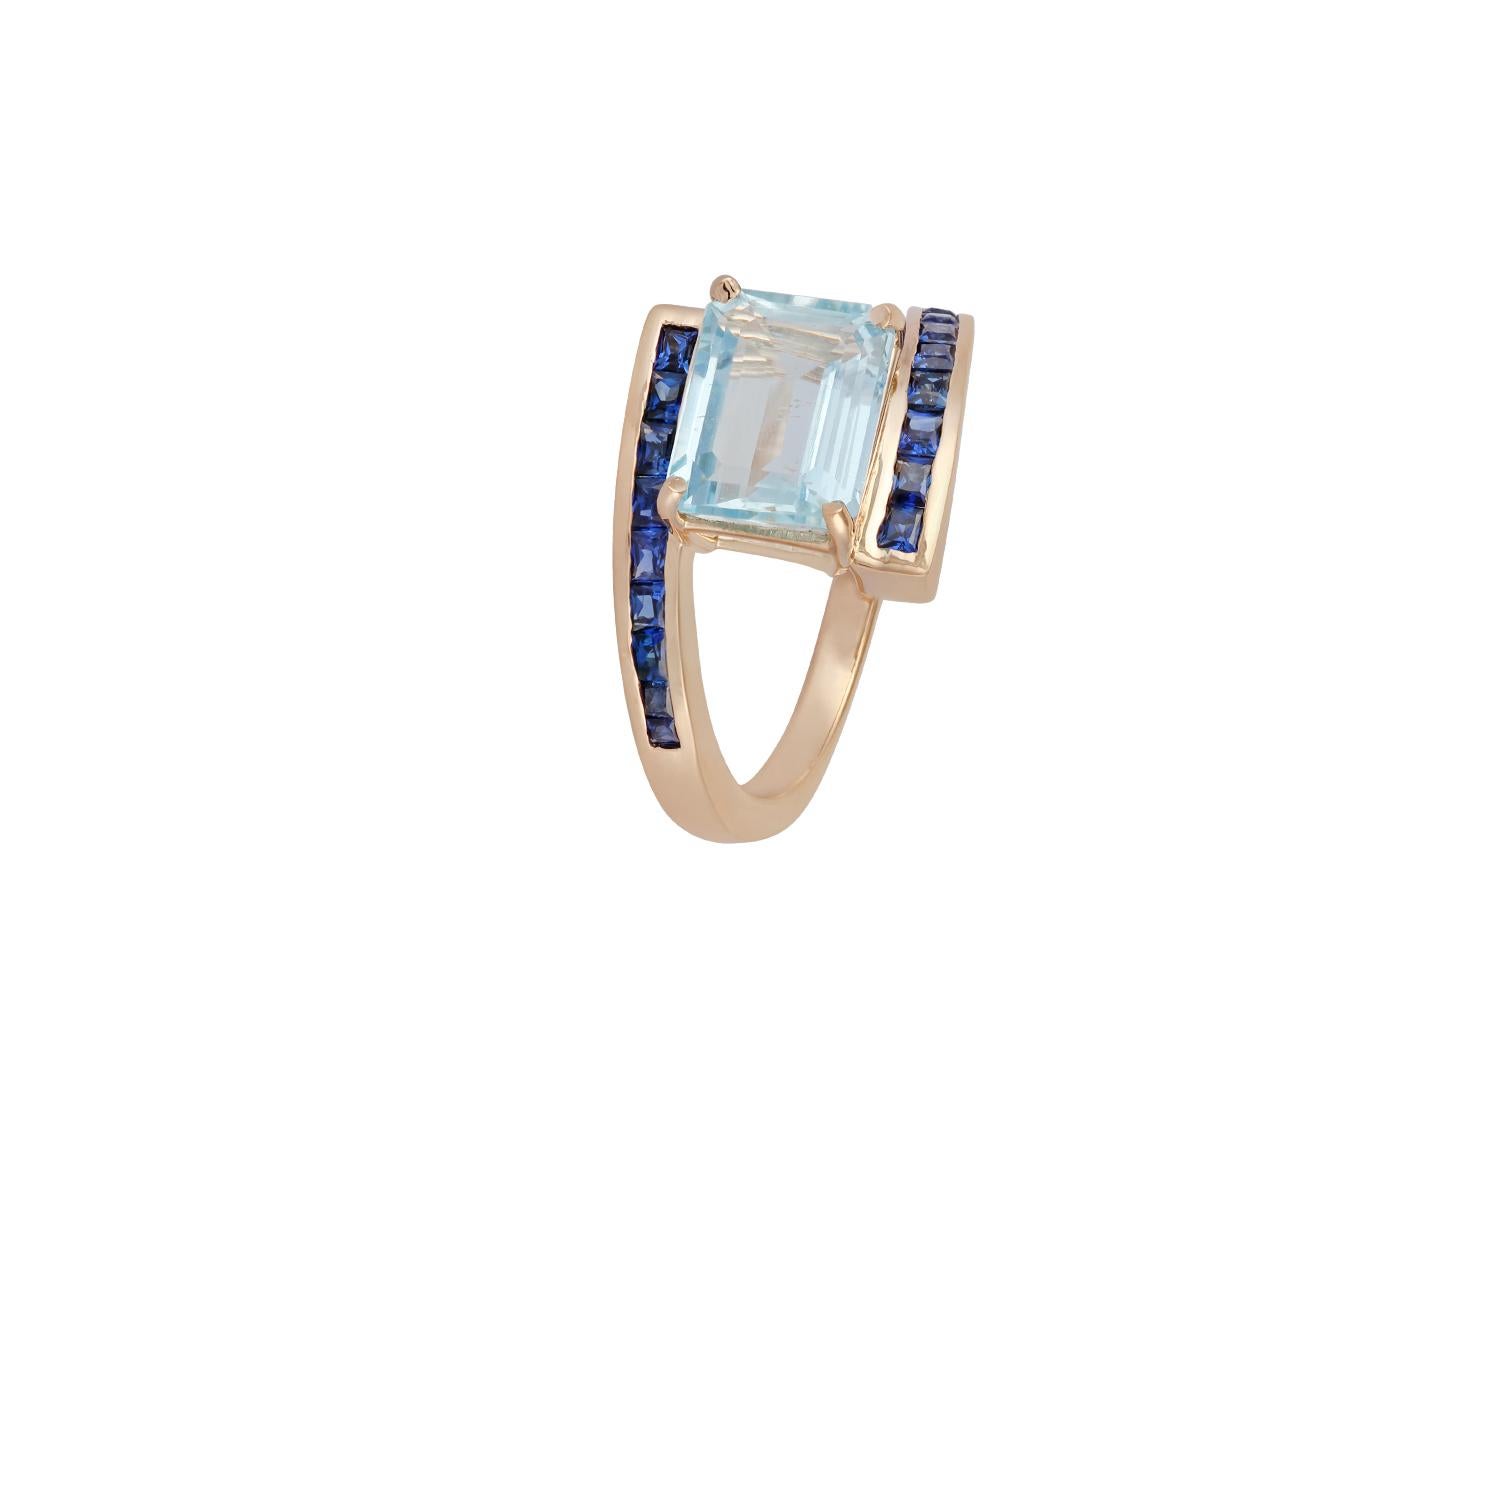 Octagon Cut Aquamarine and Blue Sapphire Ring Studded in 18 Karat Yellow Gold